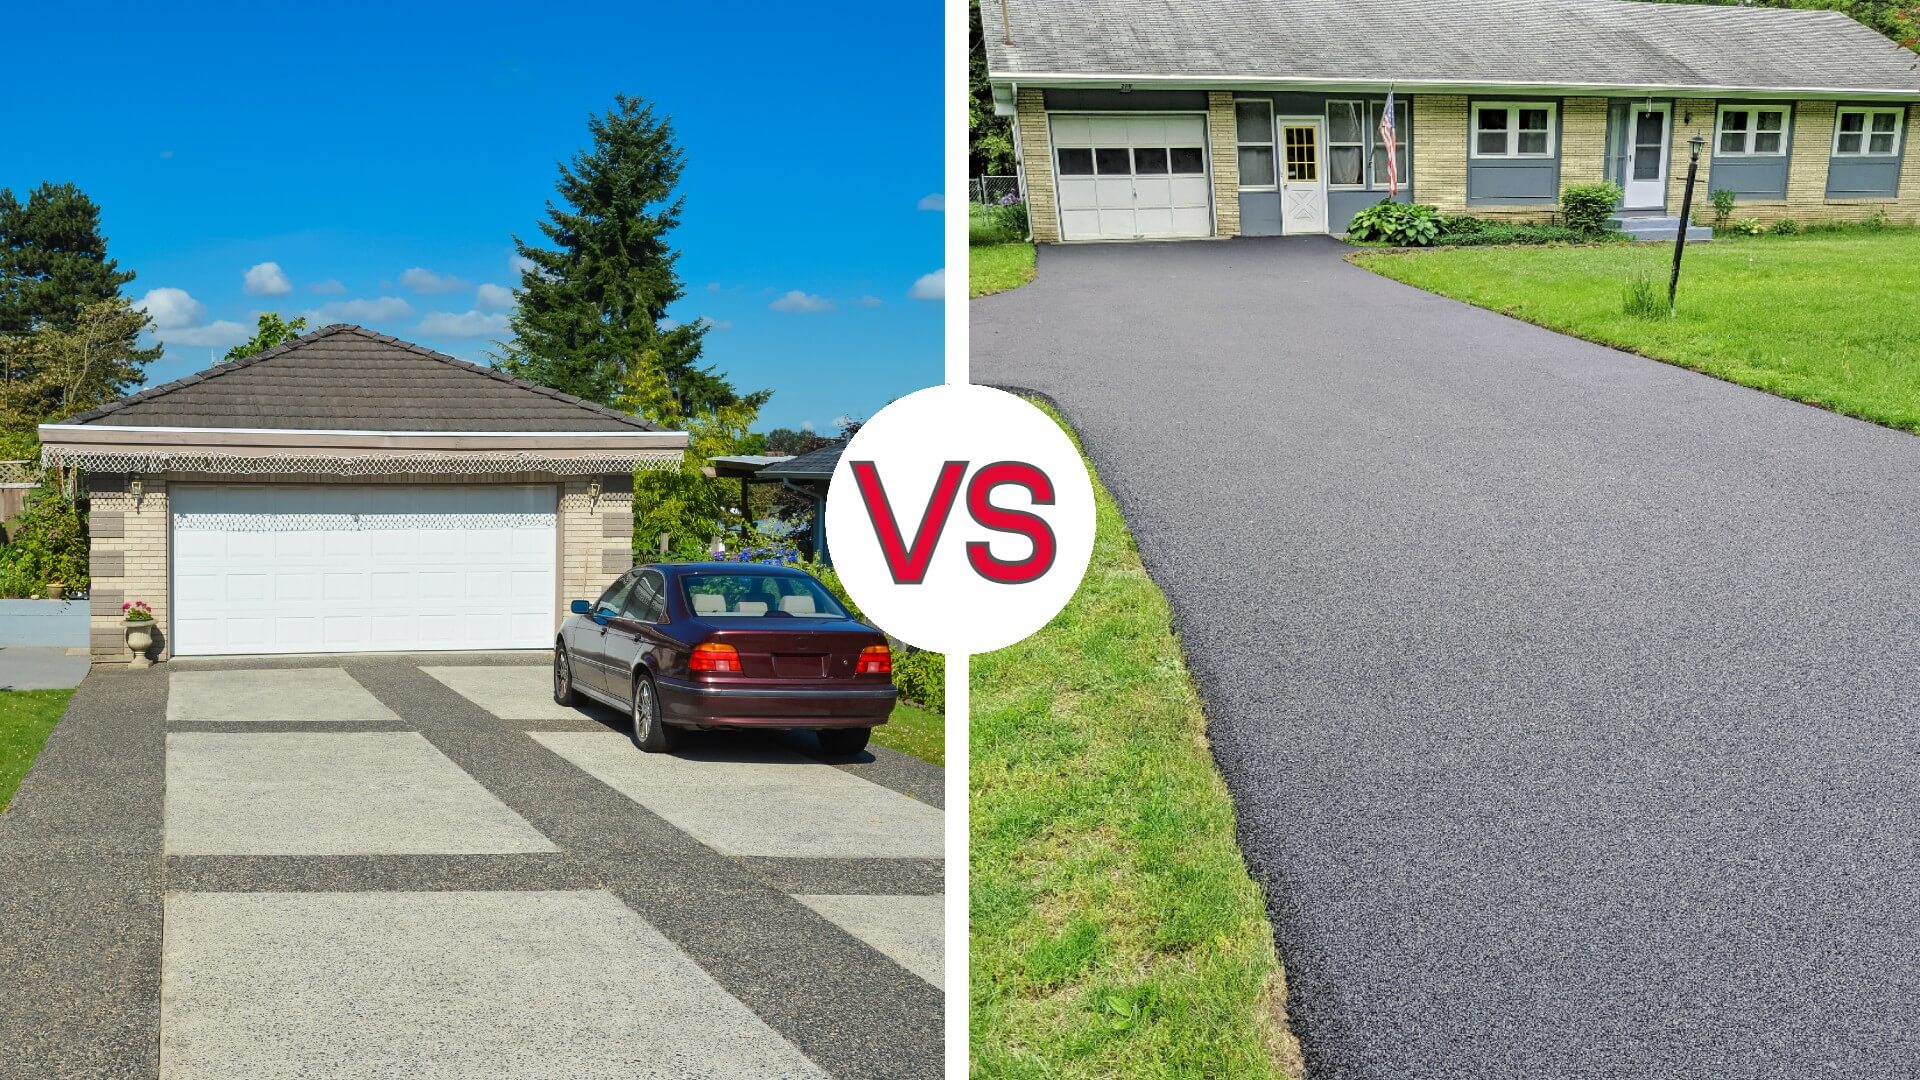 This is Why Concrete Driveways Are Better Than Asphalt